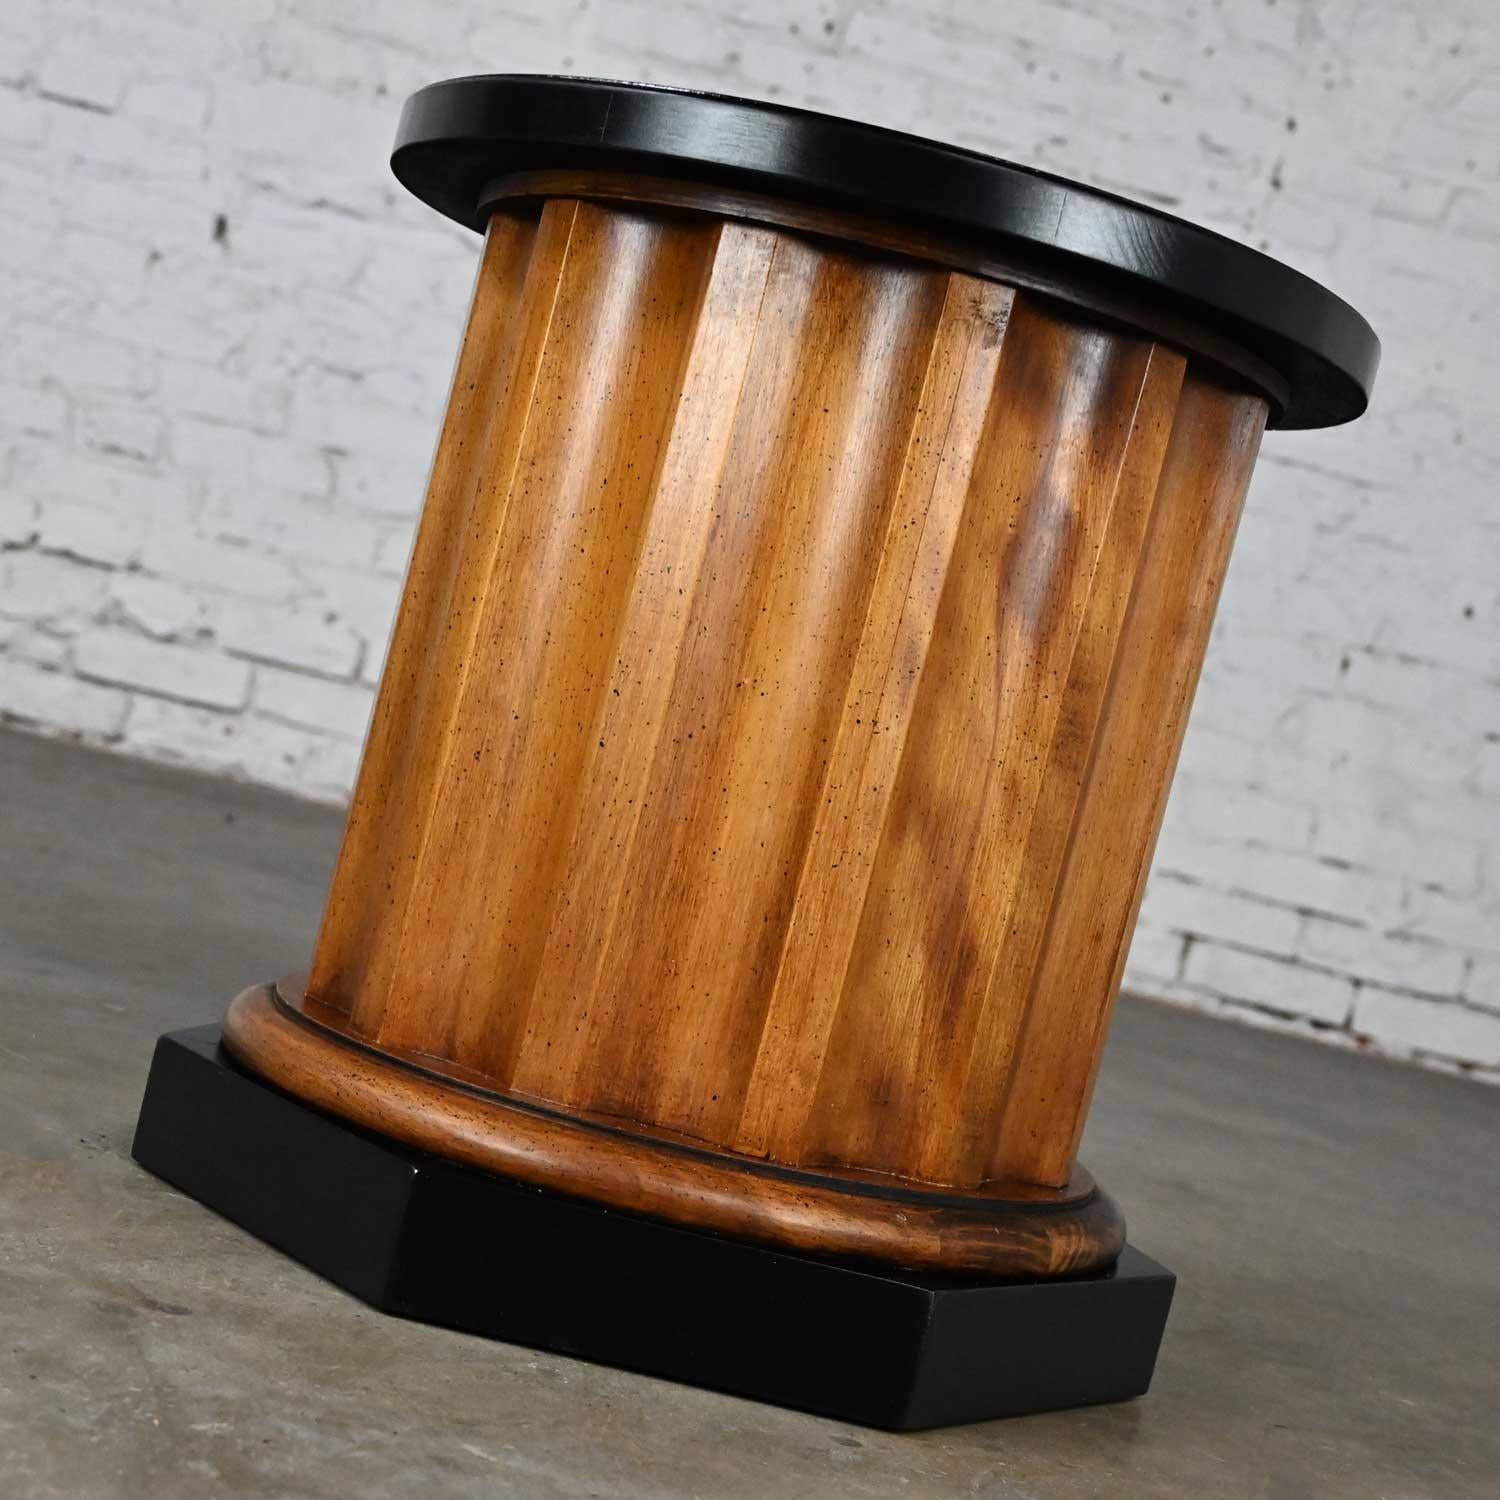 Handsome vintage neoclassic Revival walnut toned wood column end table with black accents. Beautiful condition, keeping in mind that this is vintage and not new so will have signs of use and wear. The round tabletop and octagon base have been given